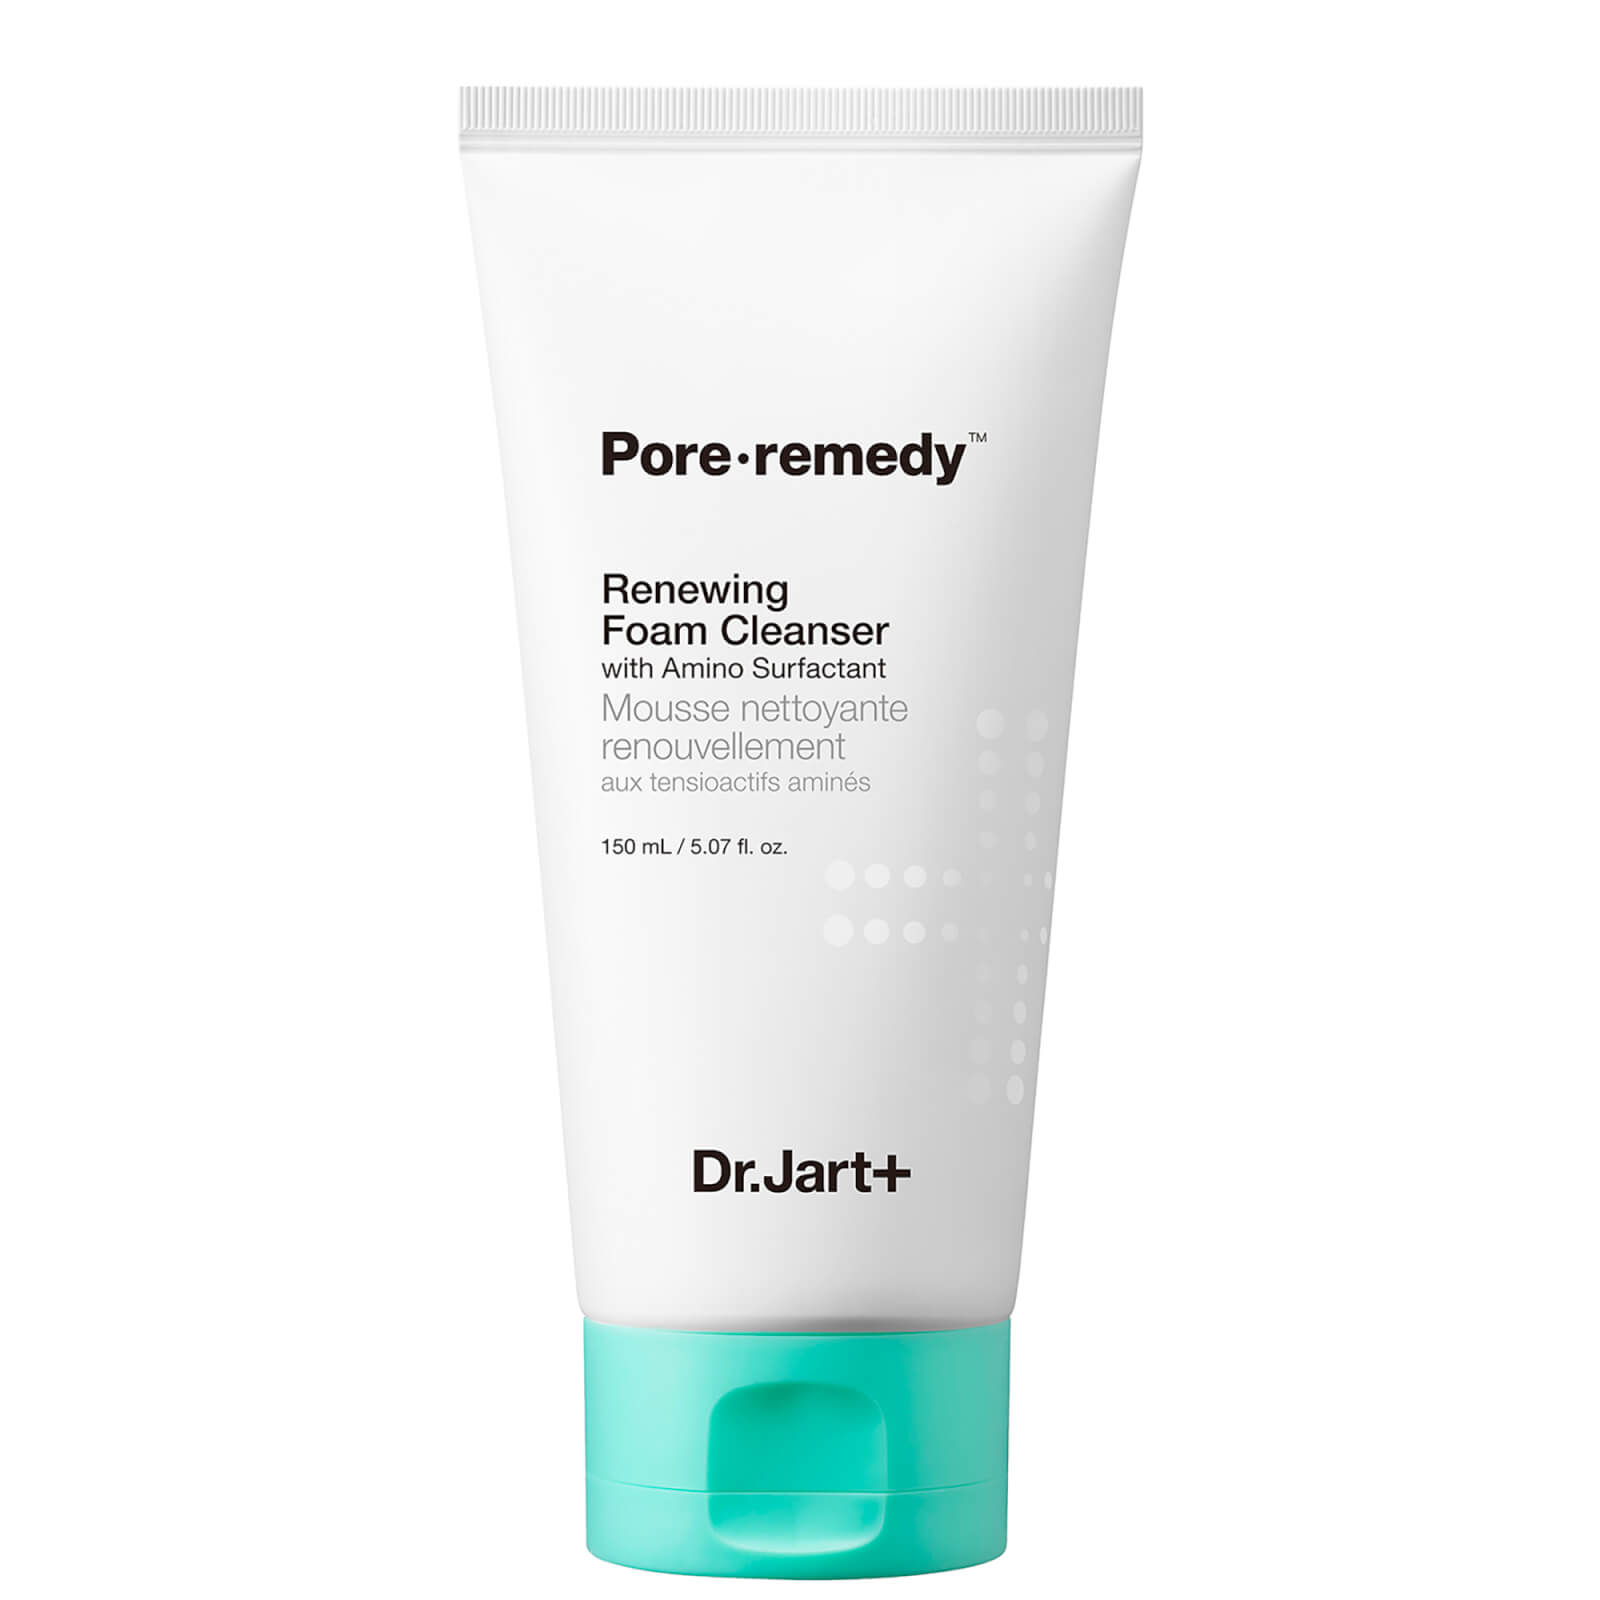 Photos - Facial / Body Cleansing Product Dr. JartPlus Dr.Jart+ Pore Remedy Renewing Foam Cleanser 150ml 